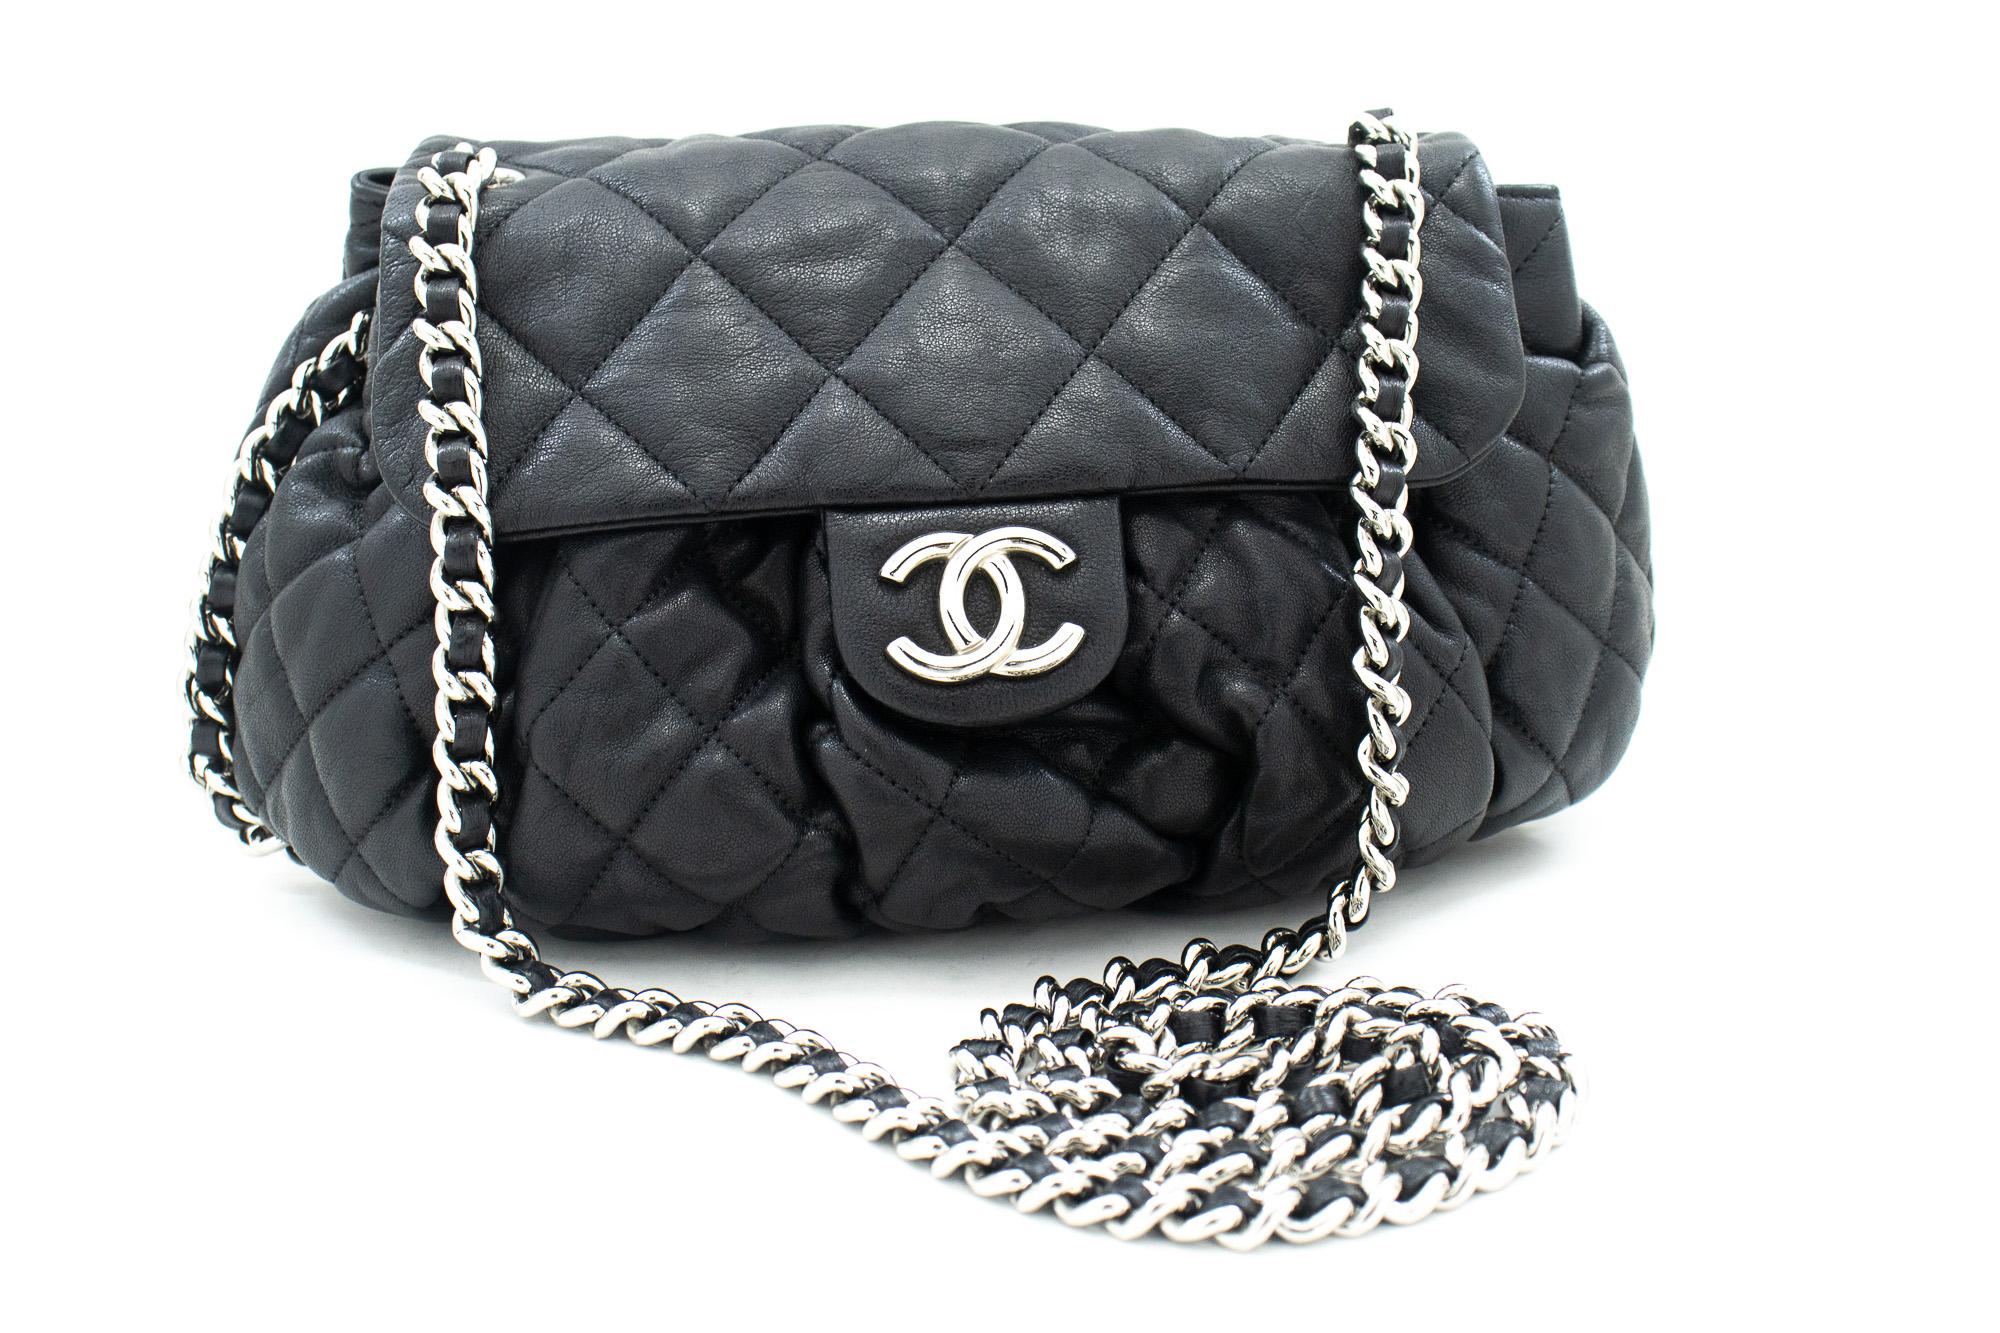 An authentic CHANEL Chain Around Shoulder Bag Crossbody Black Calfskin Leather. The color is Black. The outside material is Leather. The pattern is Solid. This item is Contemporary. The year of manufacture would be 2011.
Conditions & Ratings
Outside